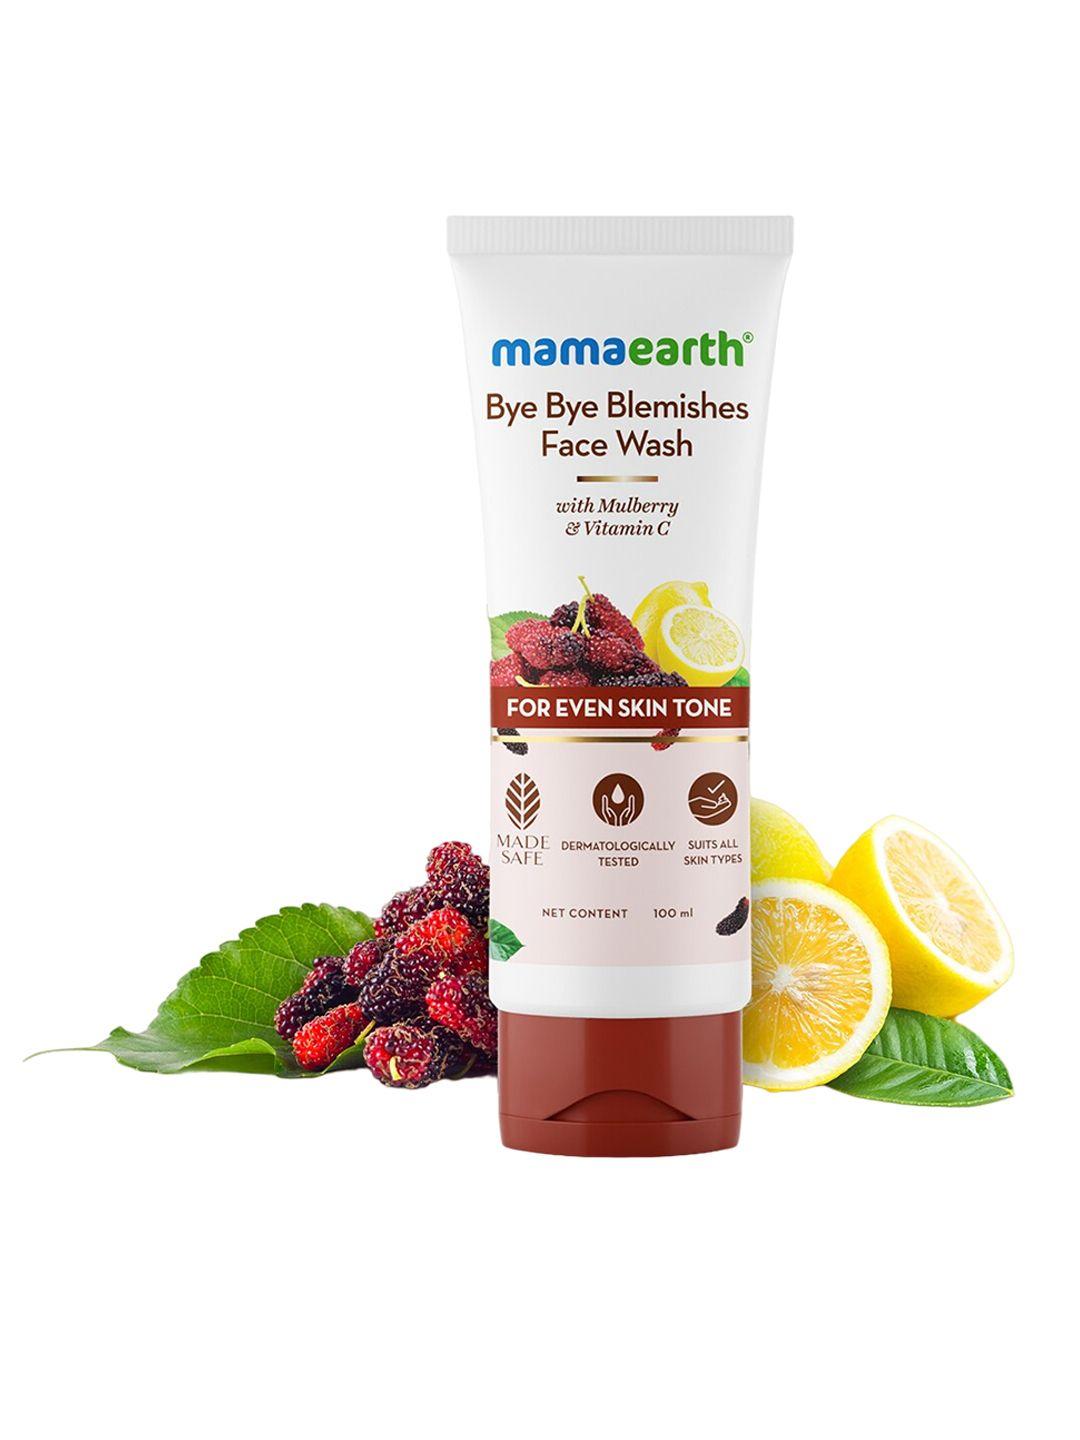 mamaearth bye bye blemishes face wash with mulberry and vitamin c  - 100ml